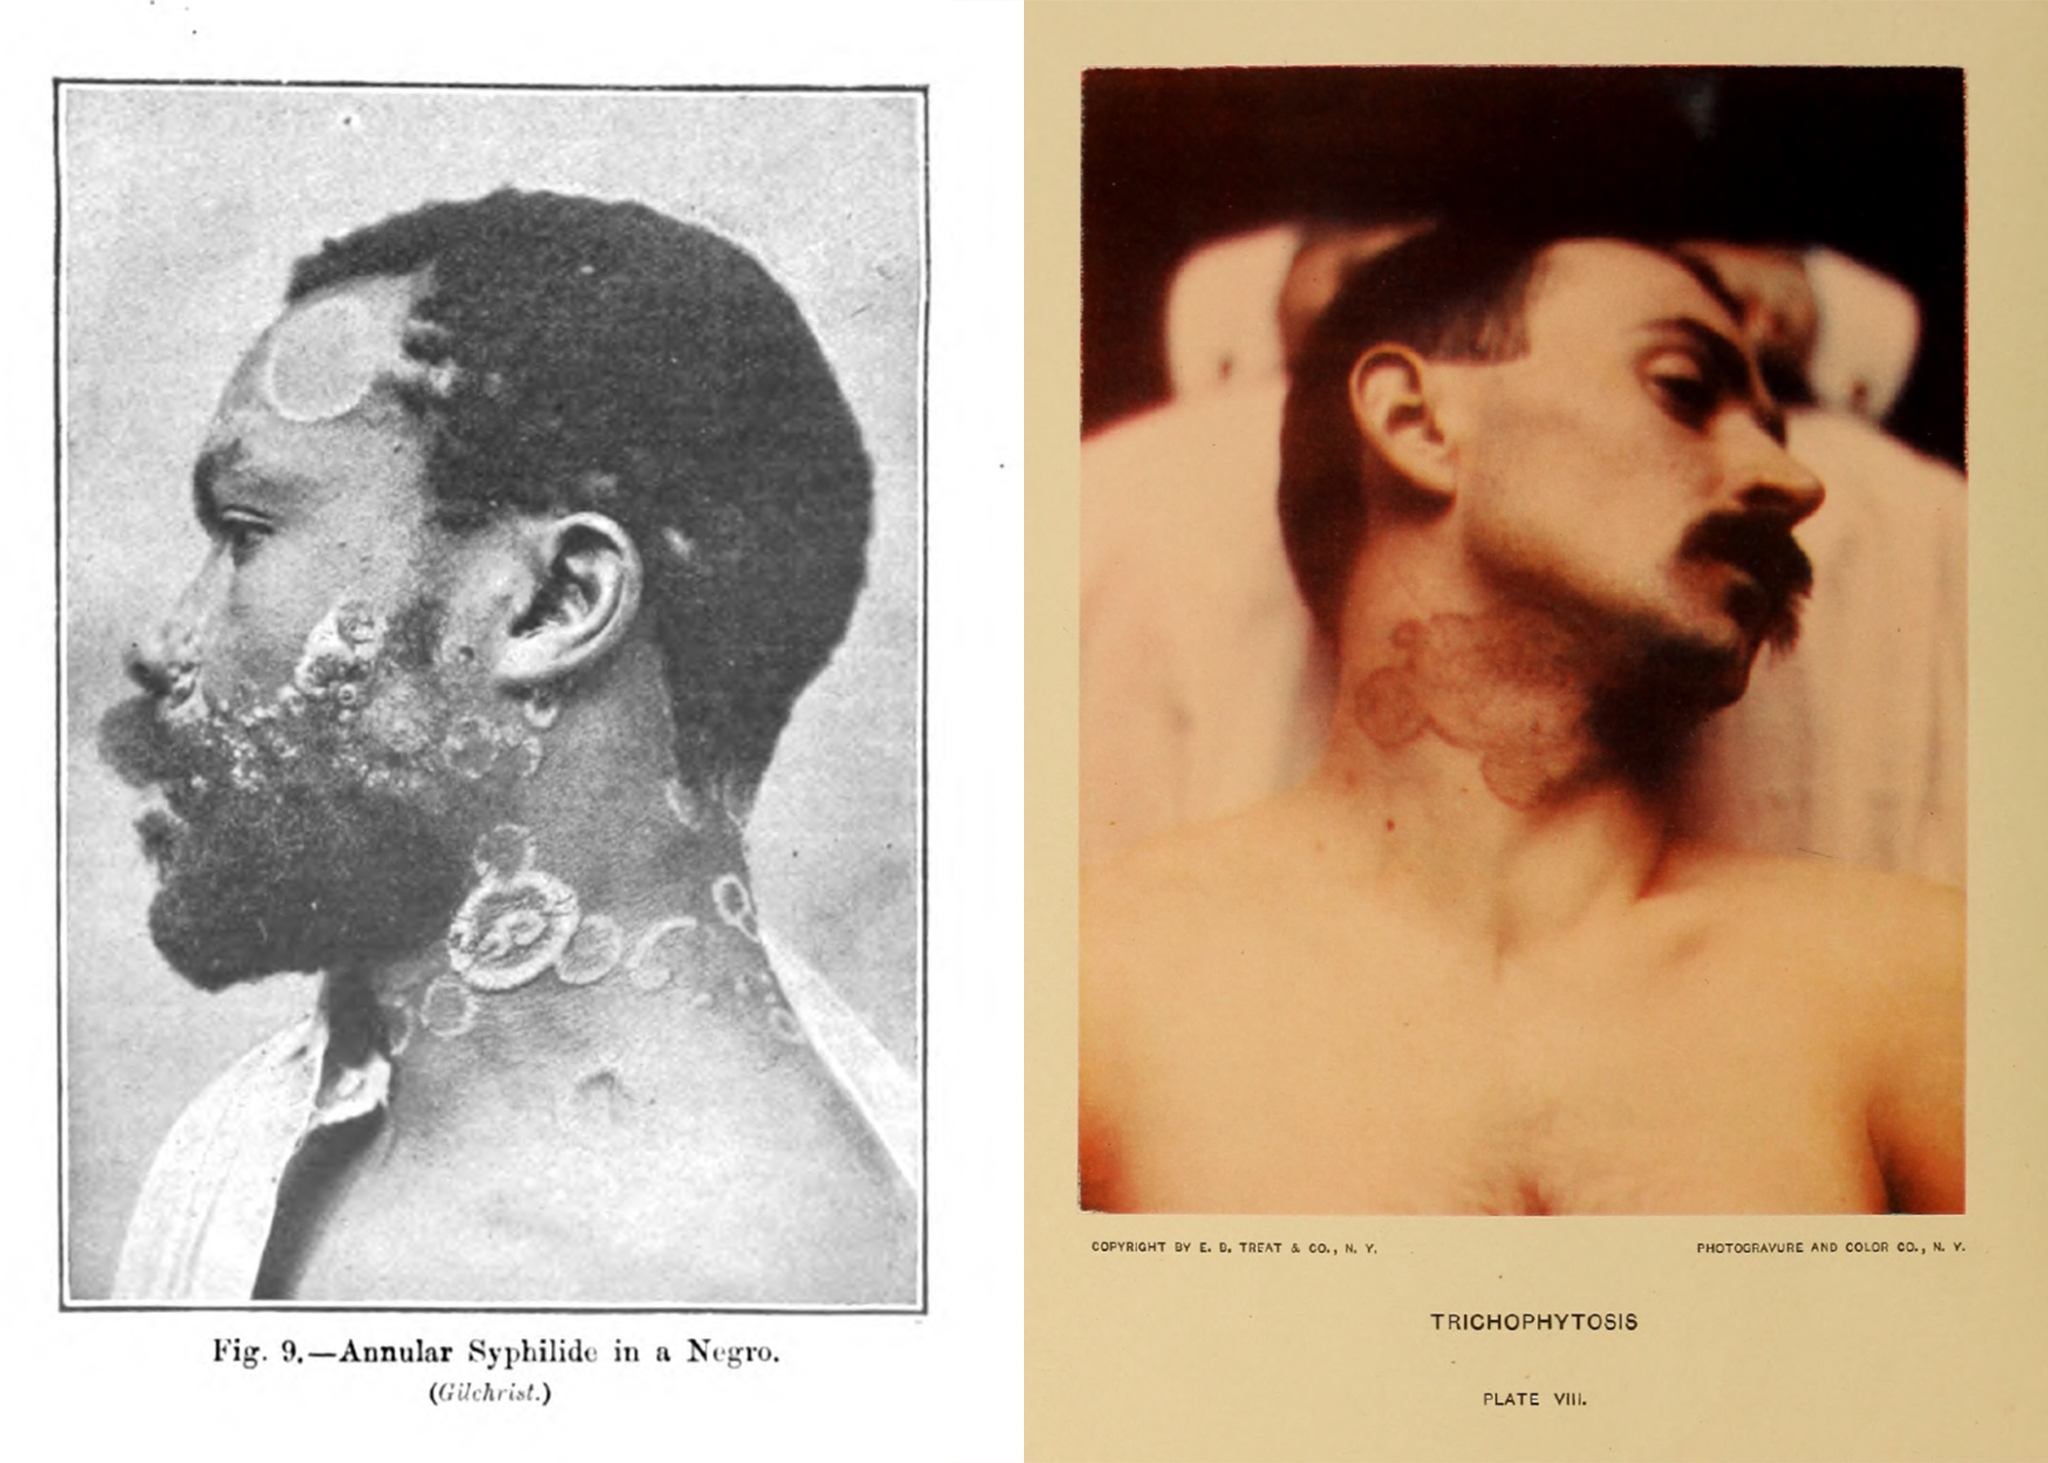 Purcell Fig 5. Left: Racial definitions are traded unproblematically in Sir Malcom Morris’ Diseases of the Skin (1909). Right: The white body is deemed normal, and thus needs not be addressed as unique, in William S. Gottheil’s Illustrated Skin Diseases (1906).